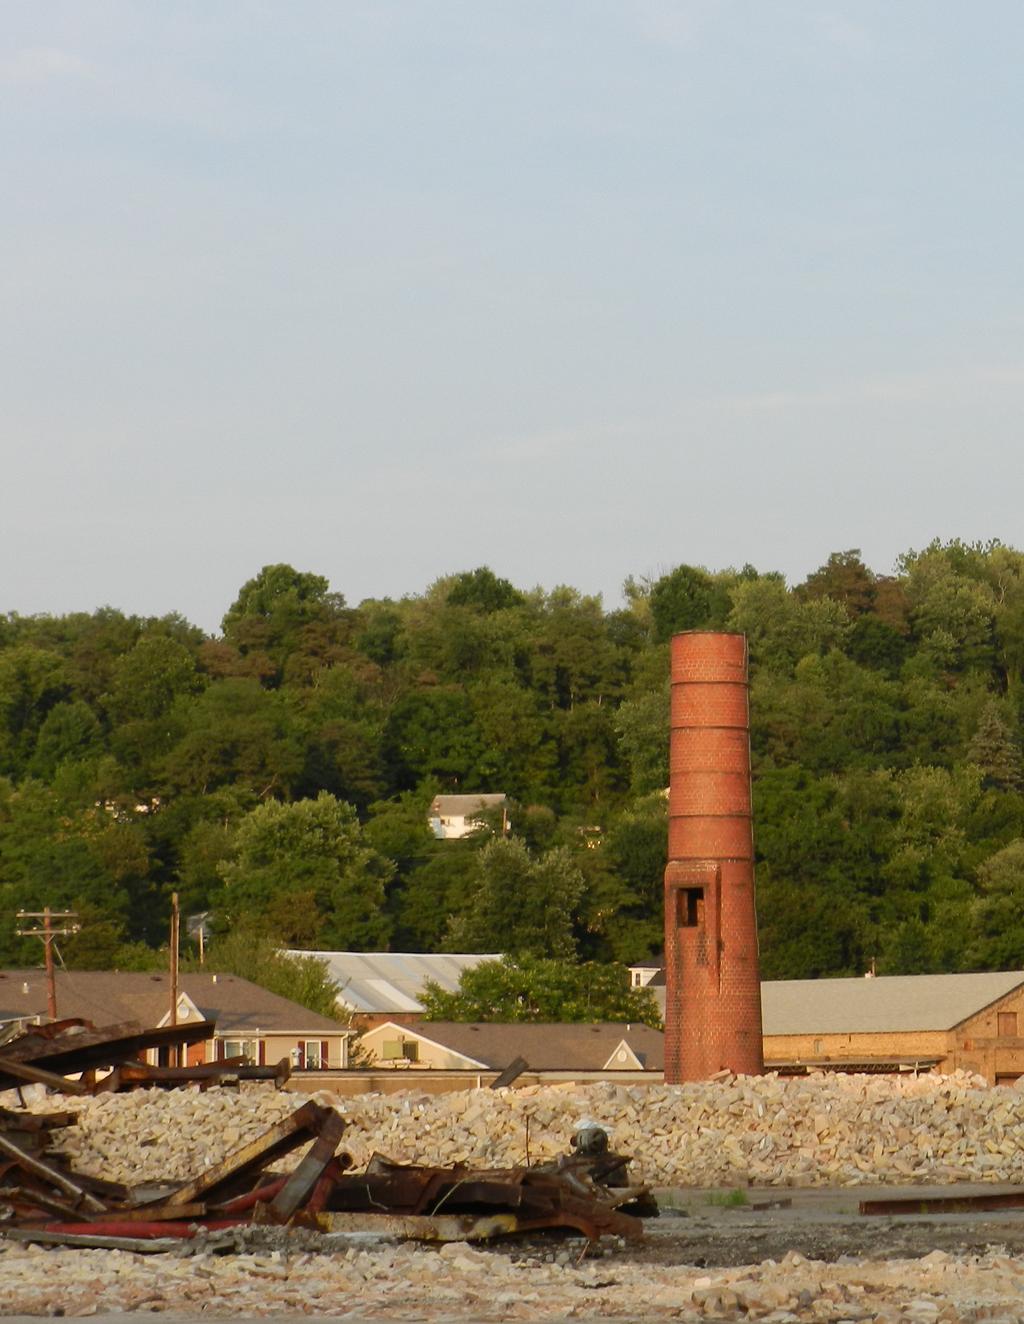 Underutilized industrial properties throughout Appalachia are an important economic asset for communities, however there are many barriers that must be overcome to realize these assets.